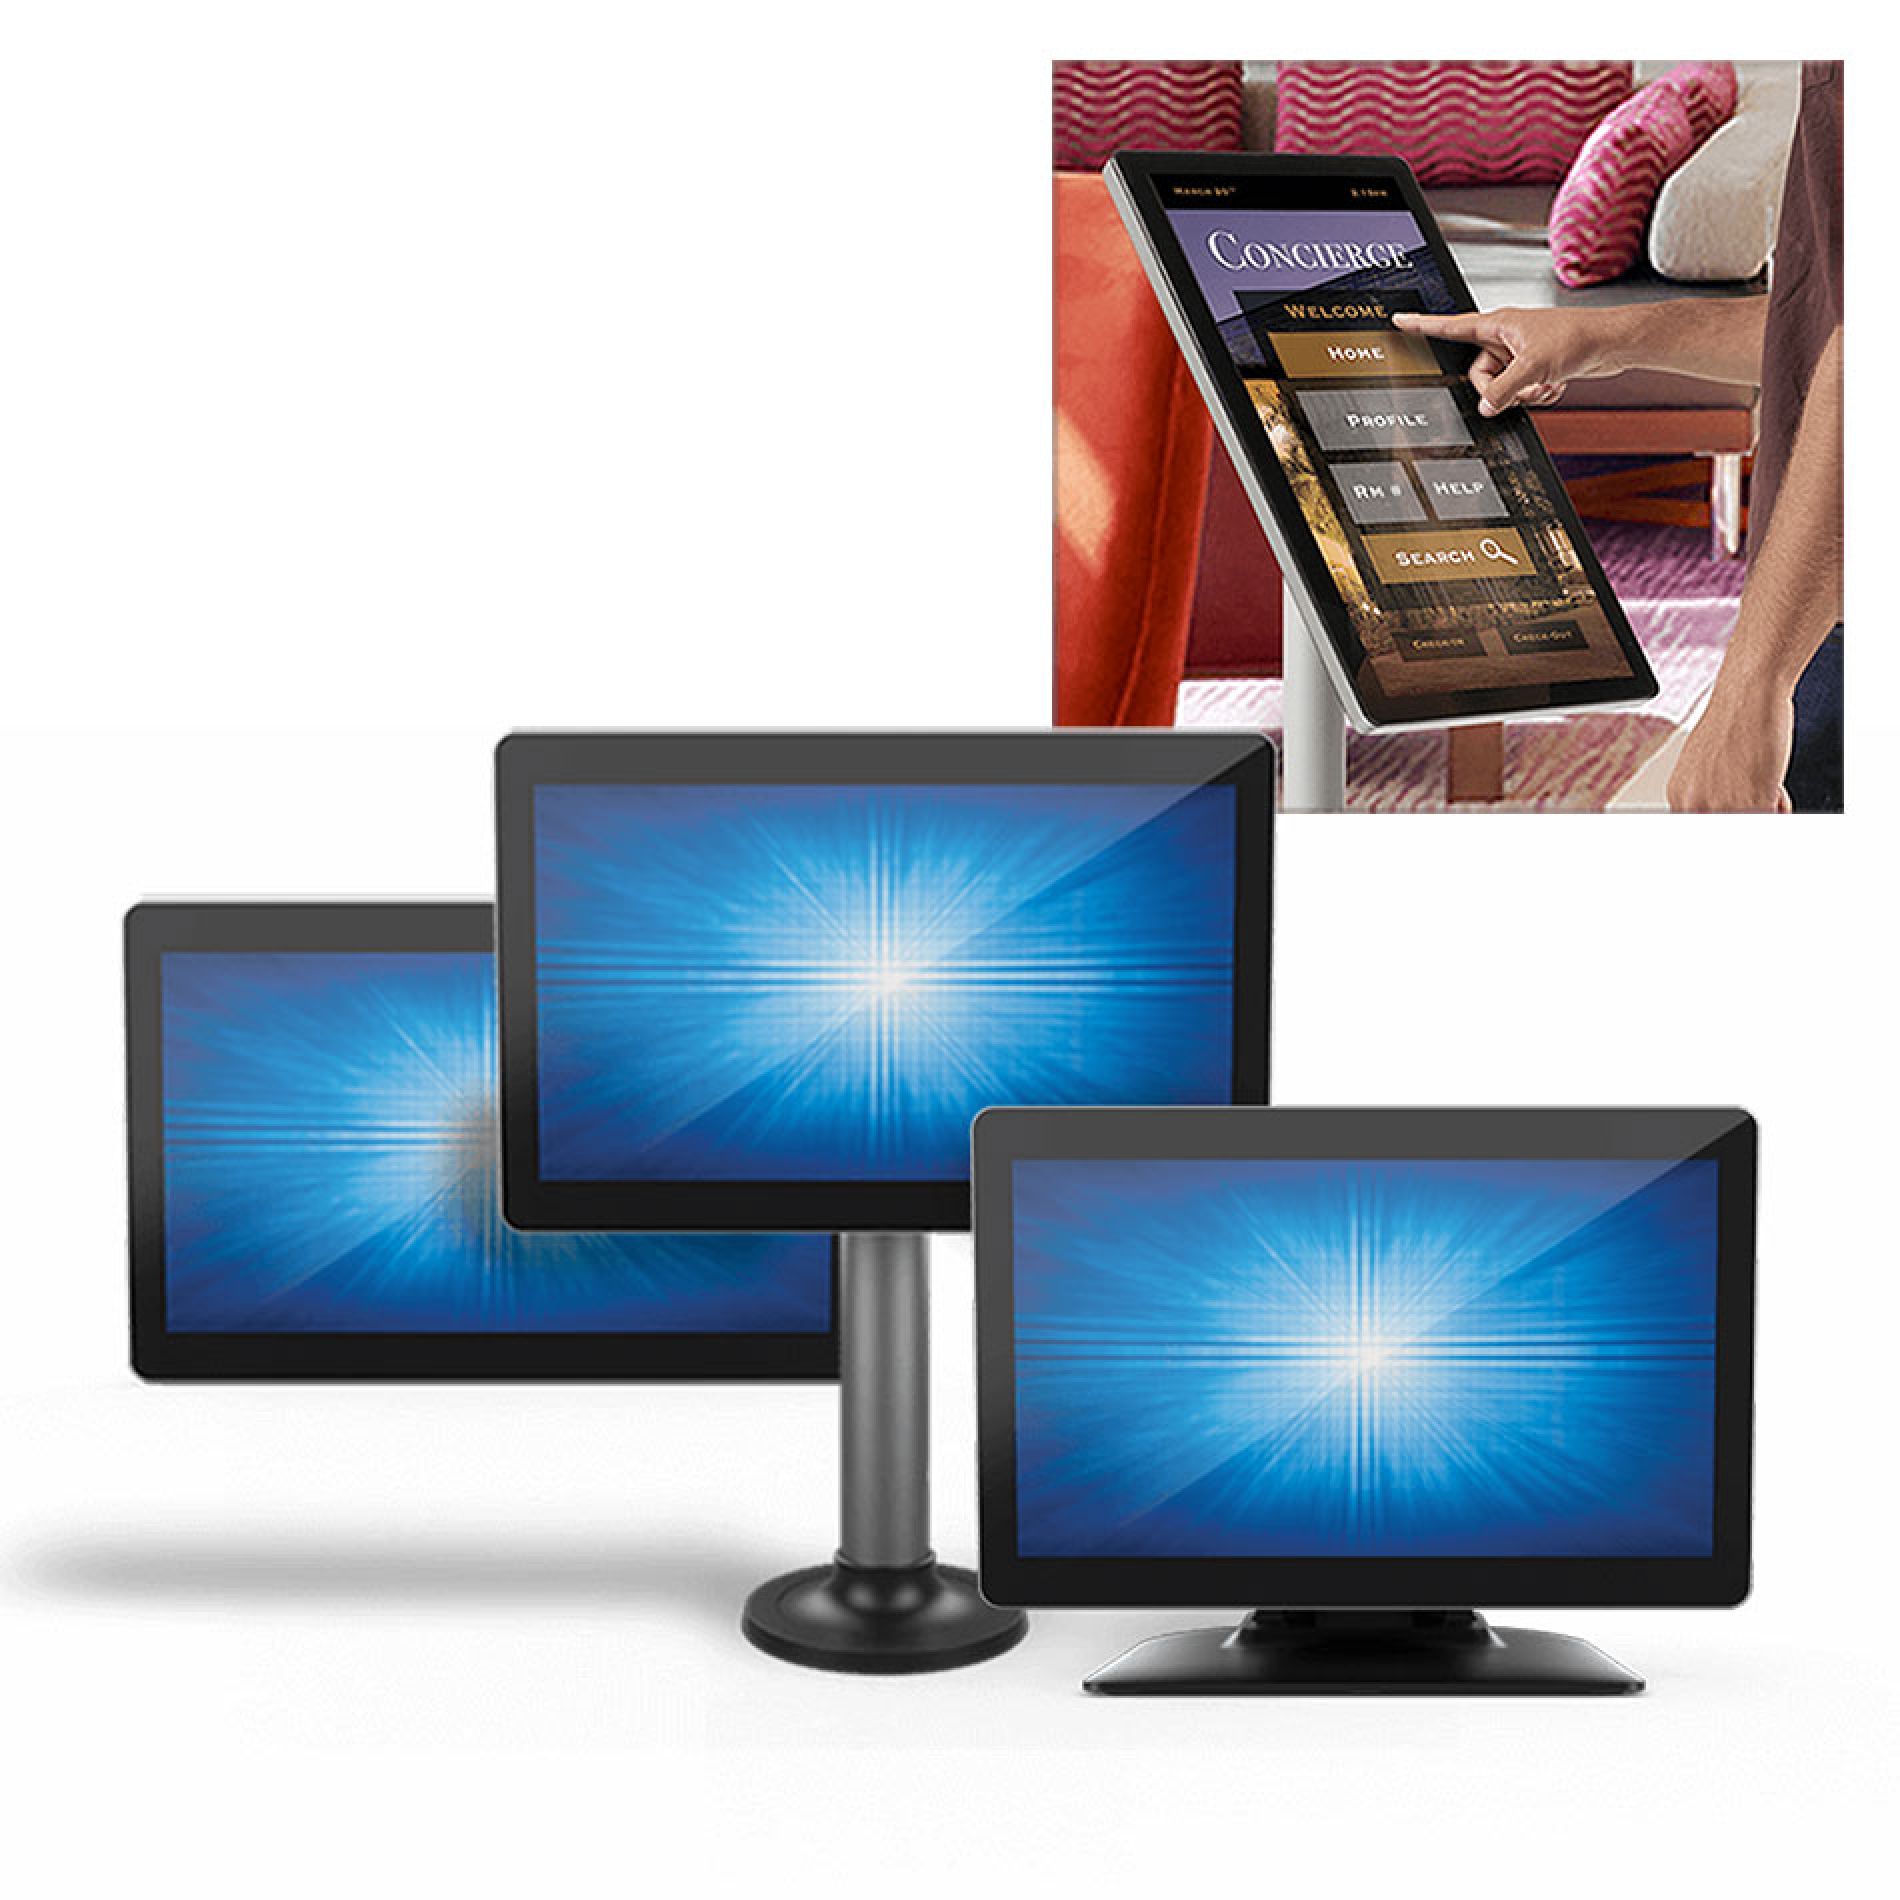 Touchscreen Computers Gallery Image